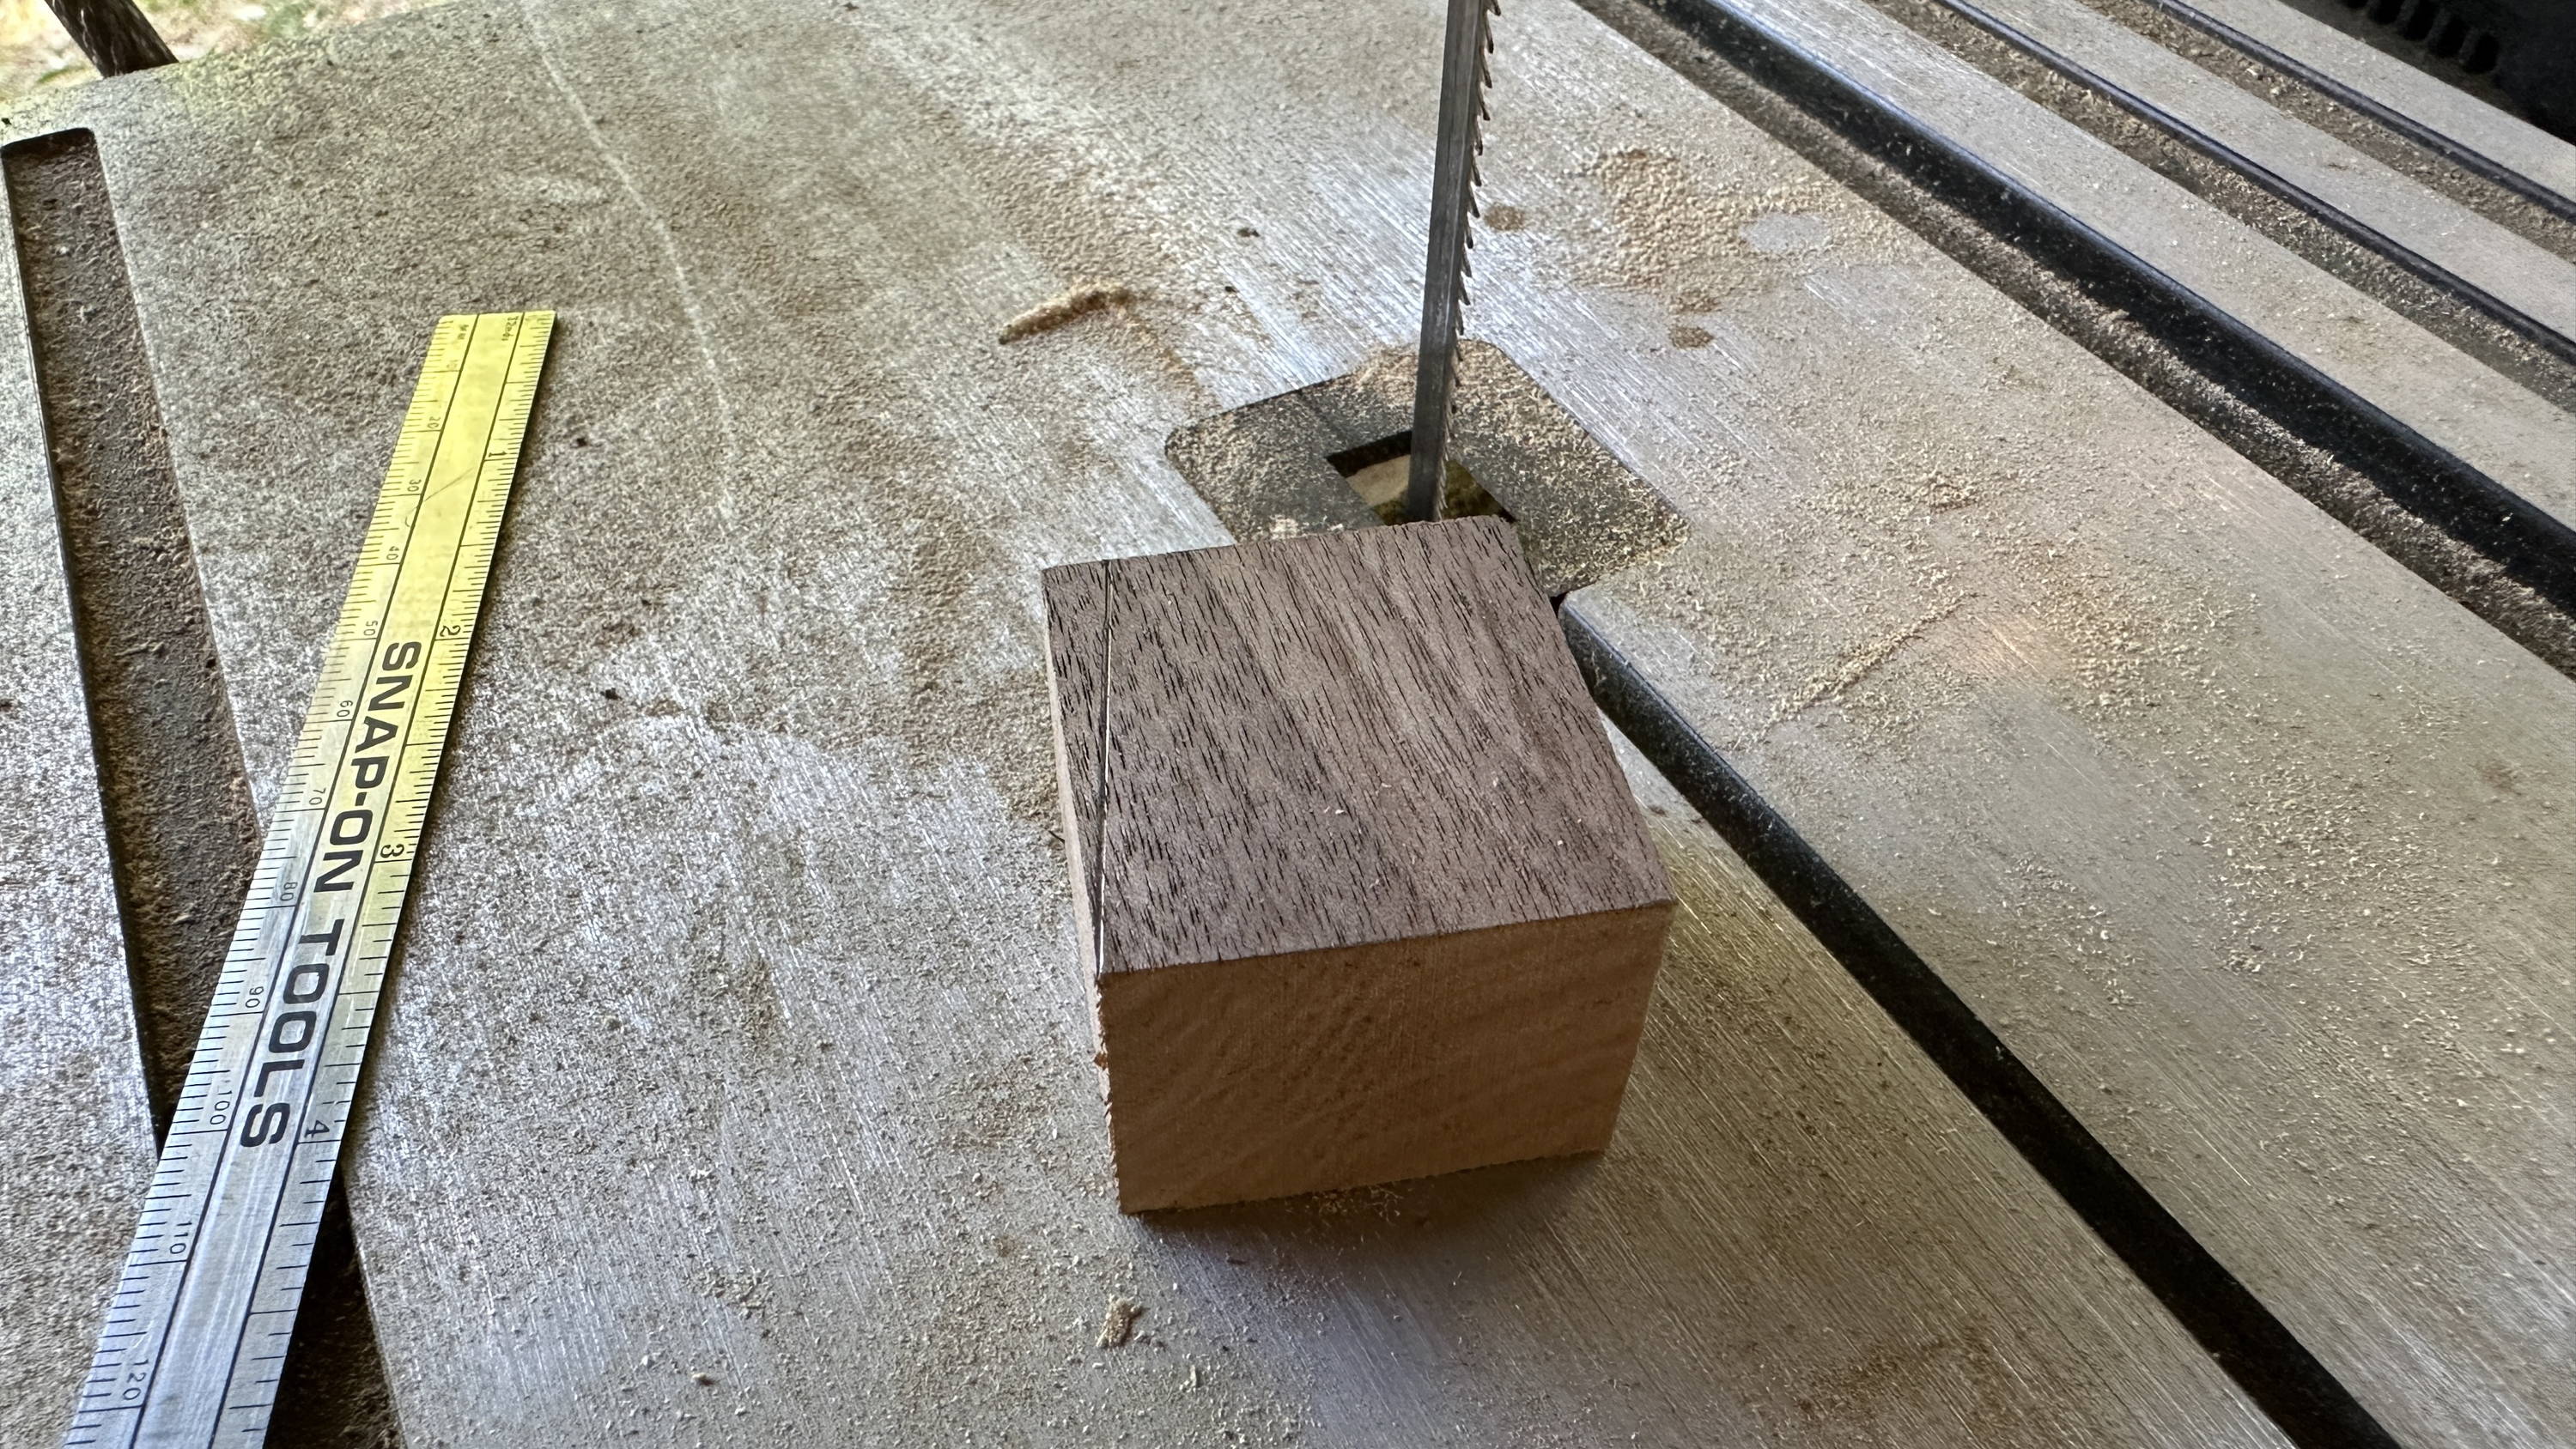 block of walnut and bandsaw ready to cut into a wedge